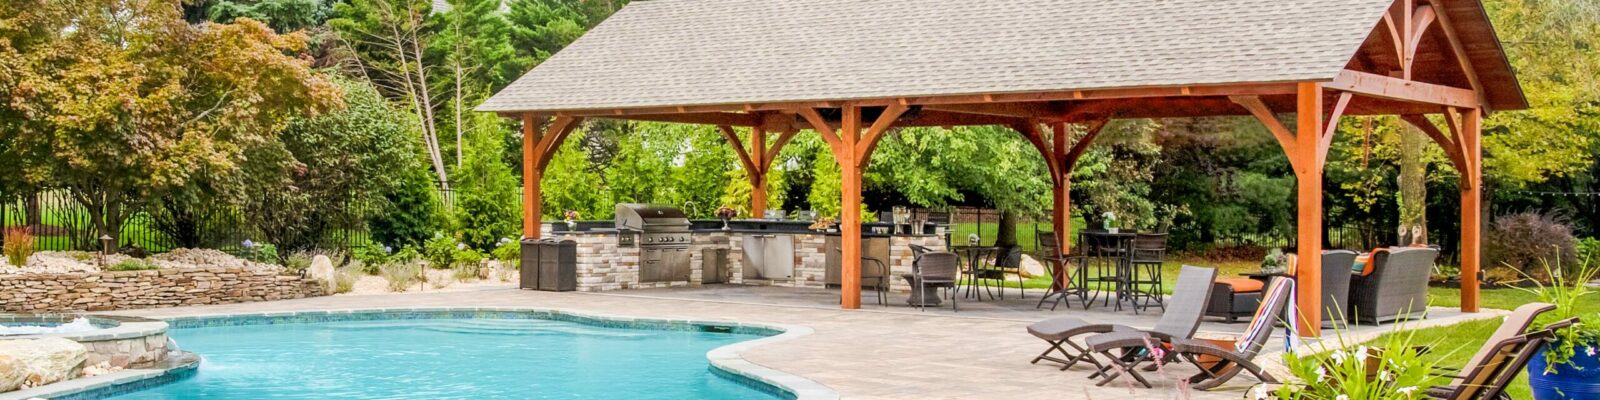 https://lancastercountybackyard.b-cdn.net/wp-content/uploads/fly-images/17792/Outdoor-Kitchen-Pavilion-with-pool-1-scaled-1600x400-c.jpg